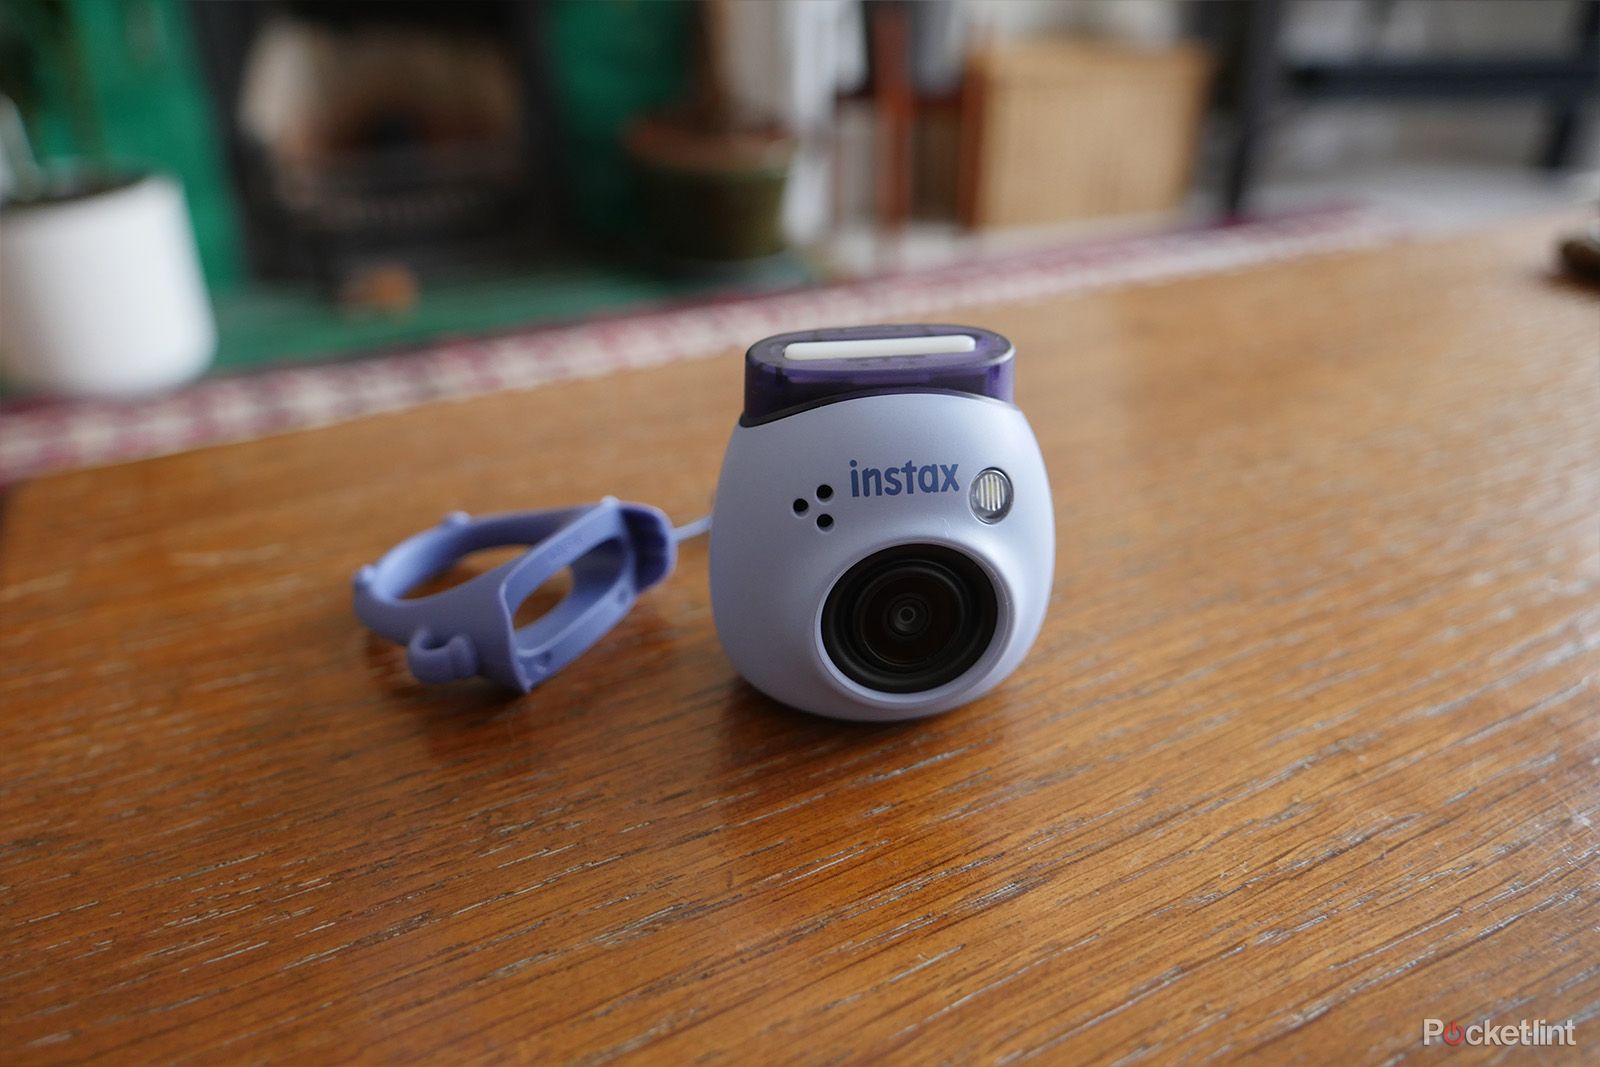 The Fujifilm Instax Pal is cute, but I'm not sure why you'd buy it